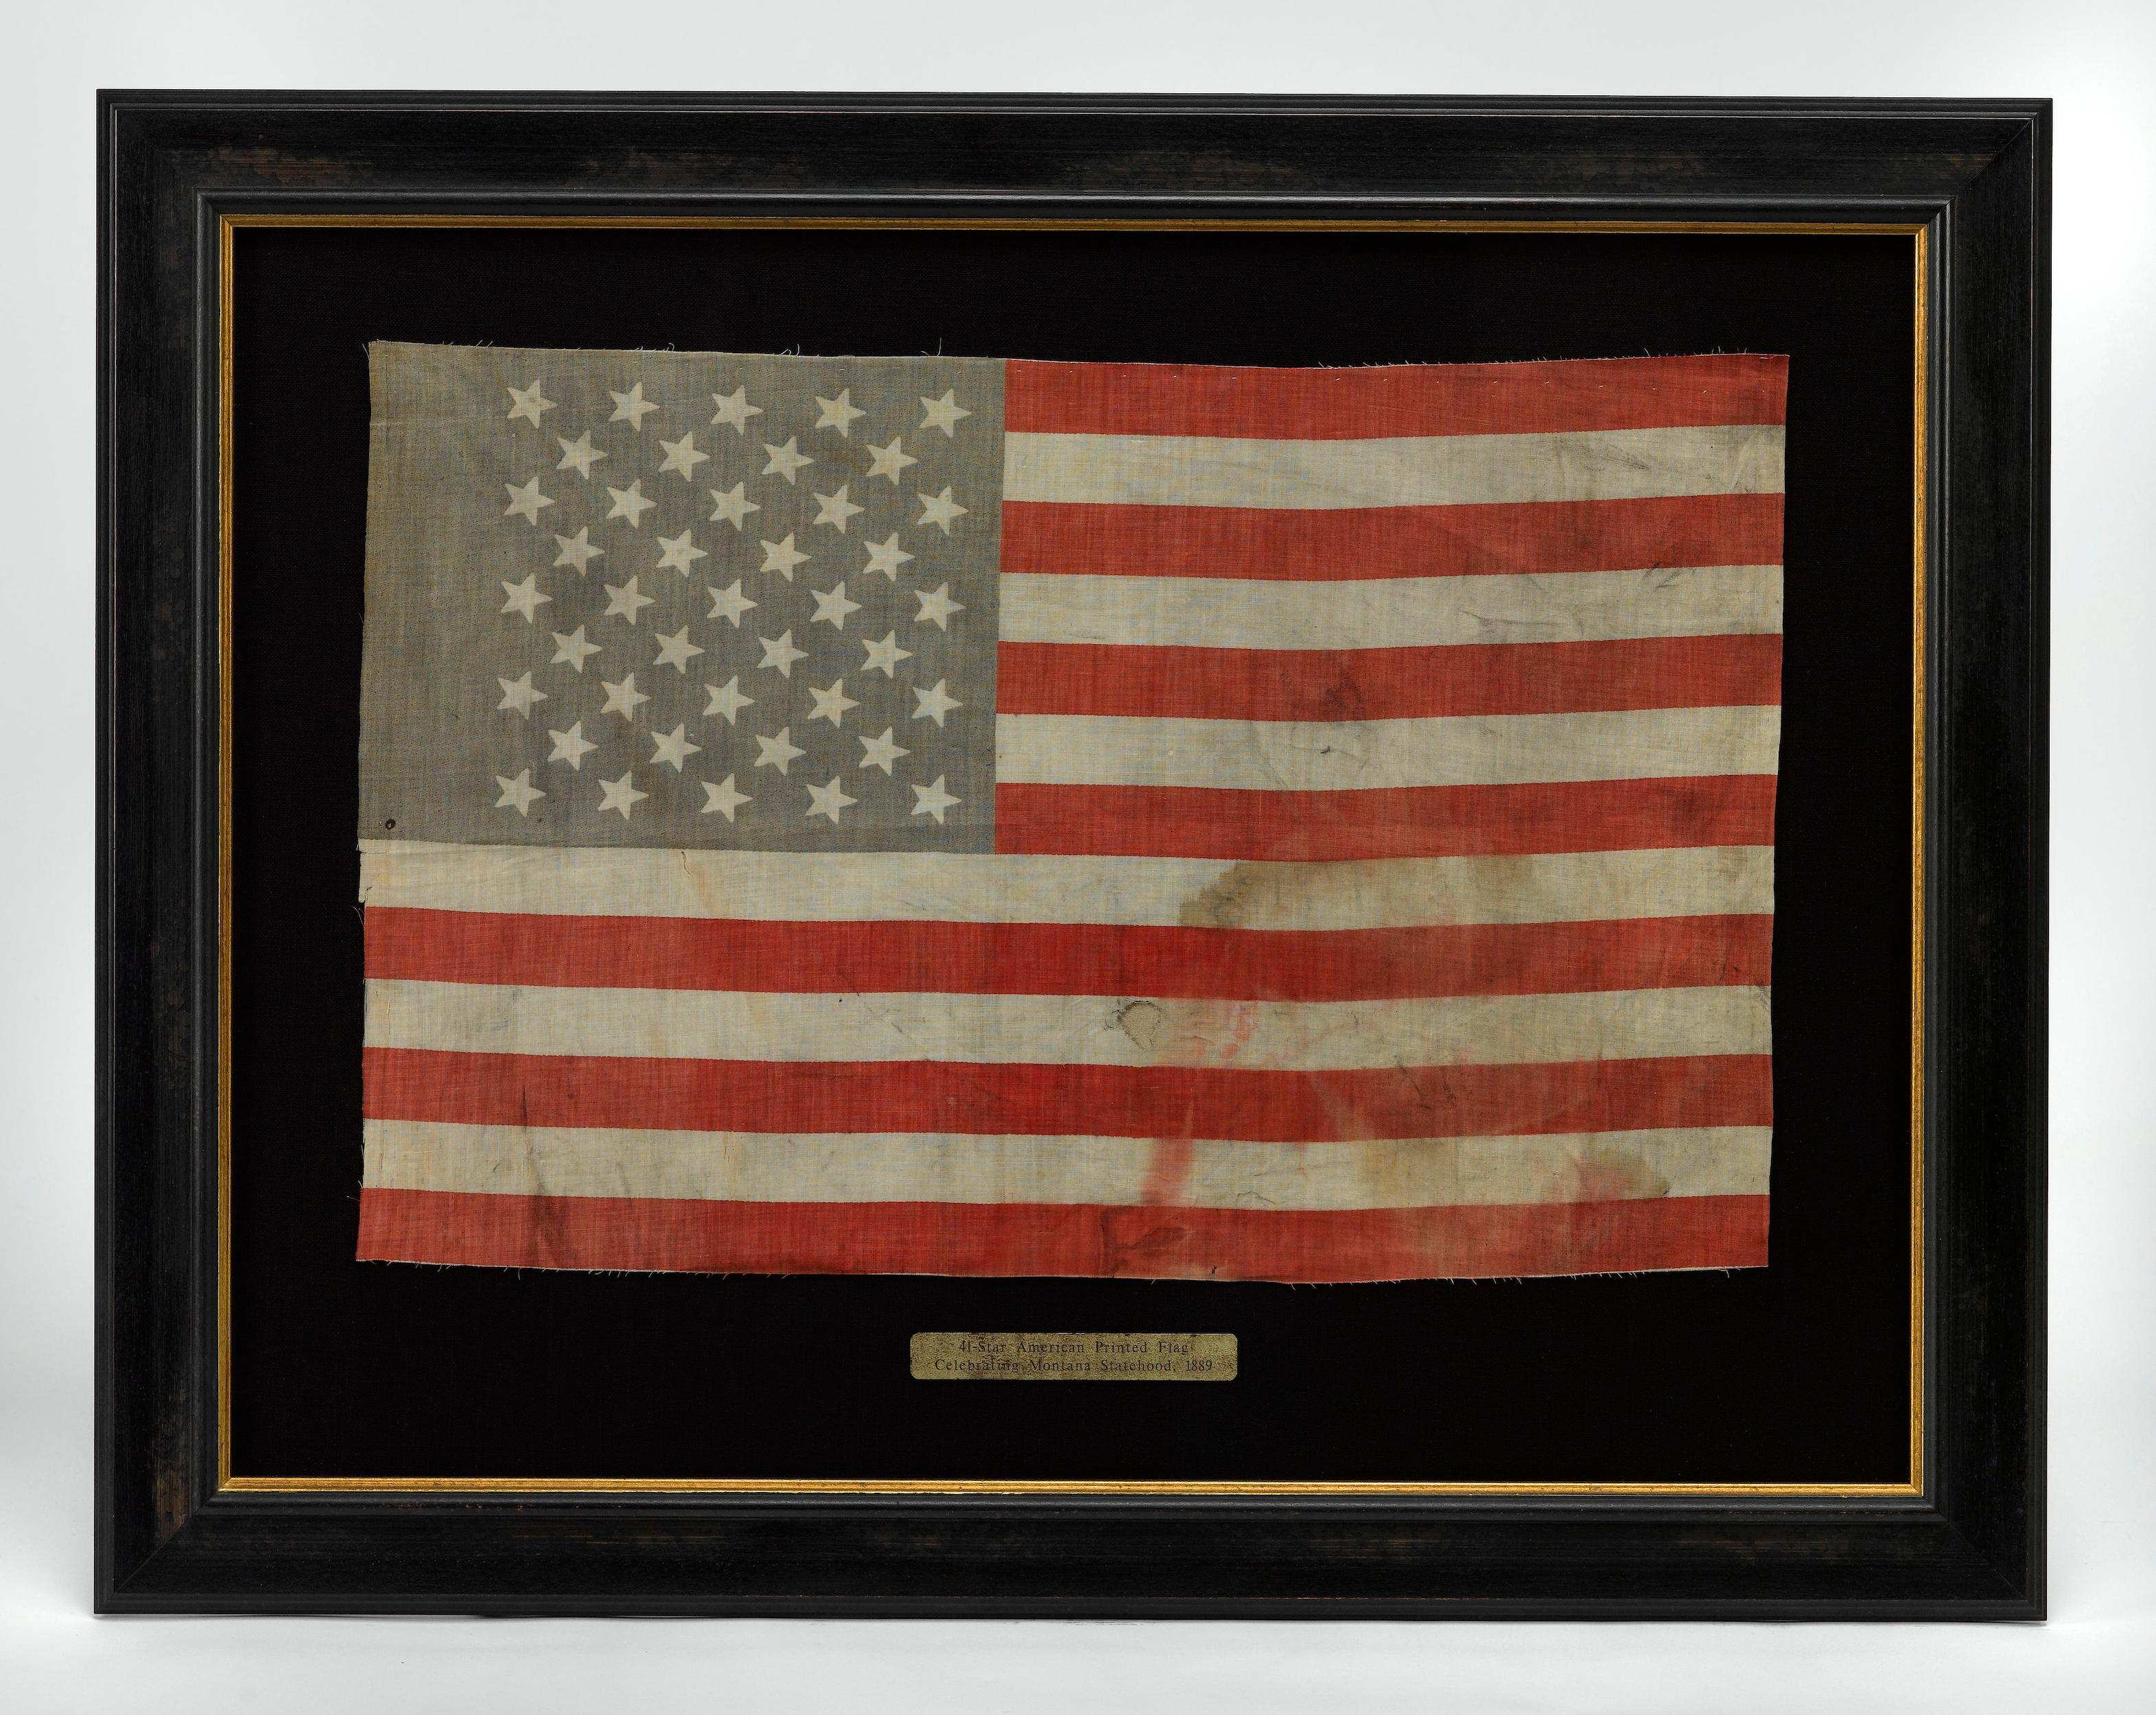 Presented is a very rare and attractively-sized 41-star flag waver, celebrating Montana statehood. The flag is printed on linen and dates to 1889. The blue canton is printed with 41 stars, arranged in 9 rows of alternating counts of 5 and 4 stars.